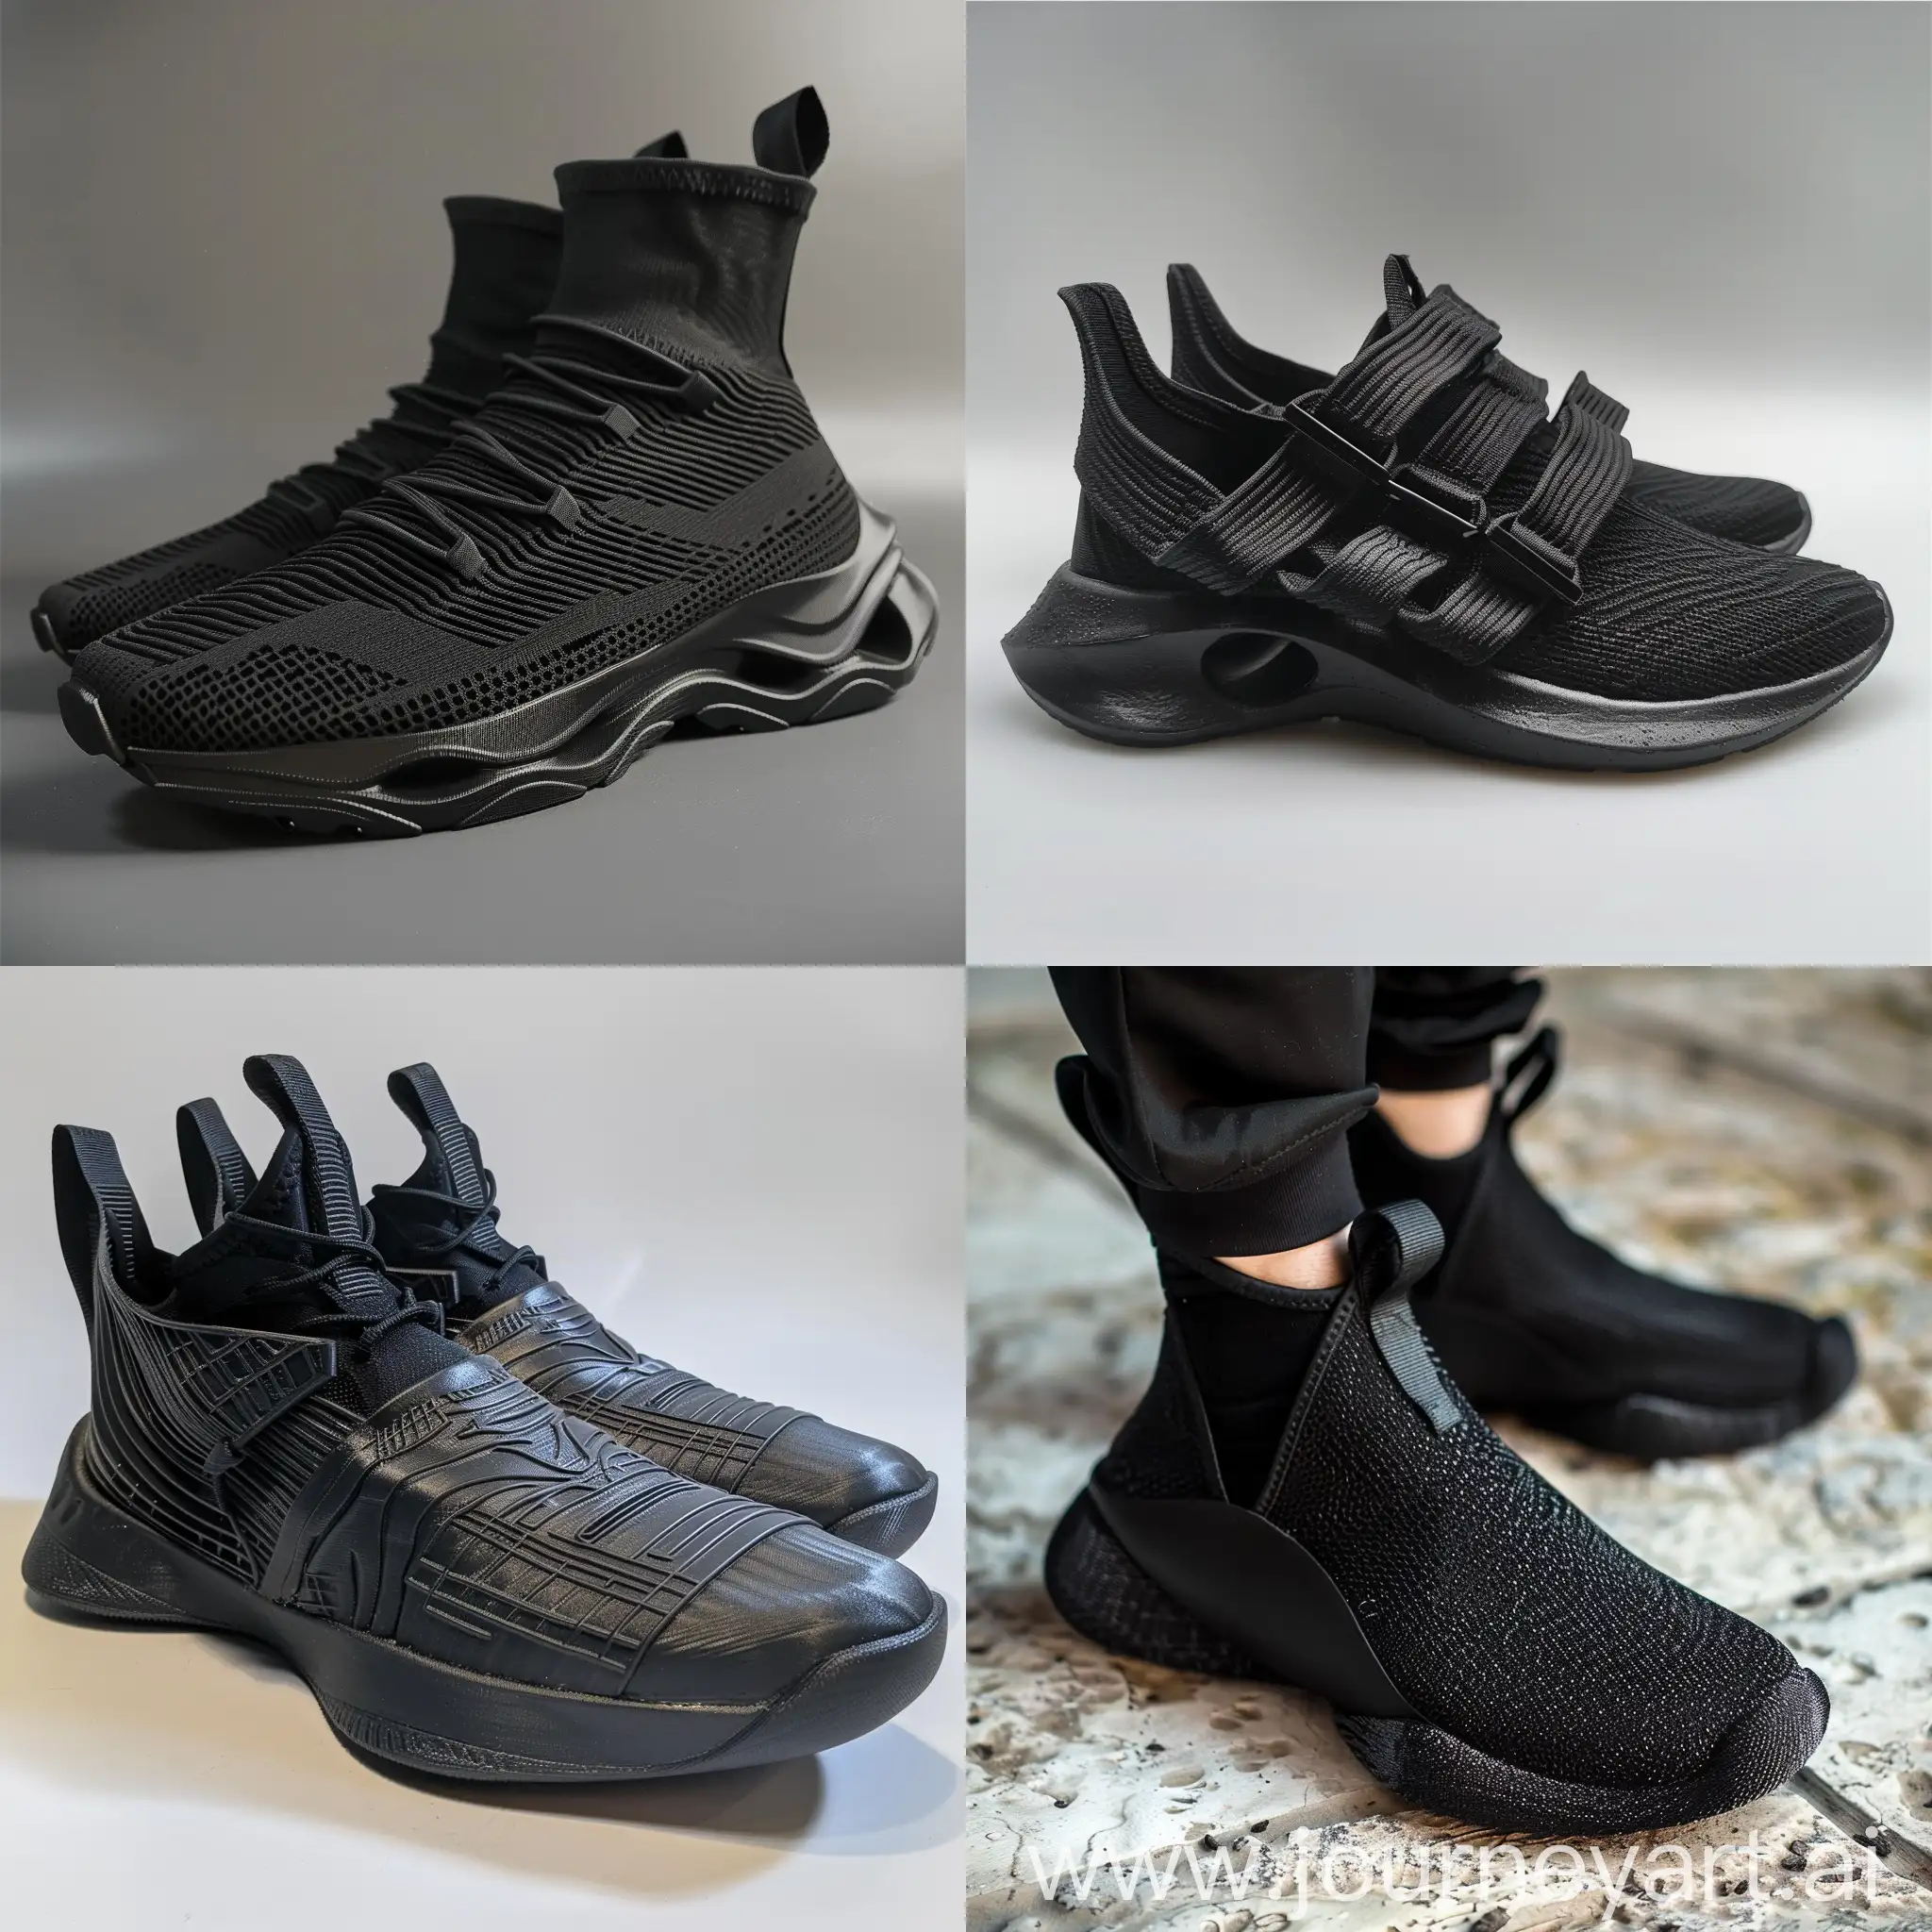 3D-Printed-Ancient-EgyptInspired-Black-Sneakers-with-Futuristic-Design